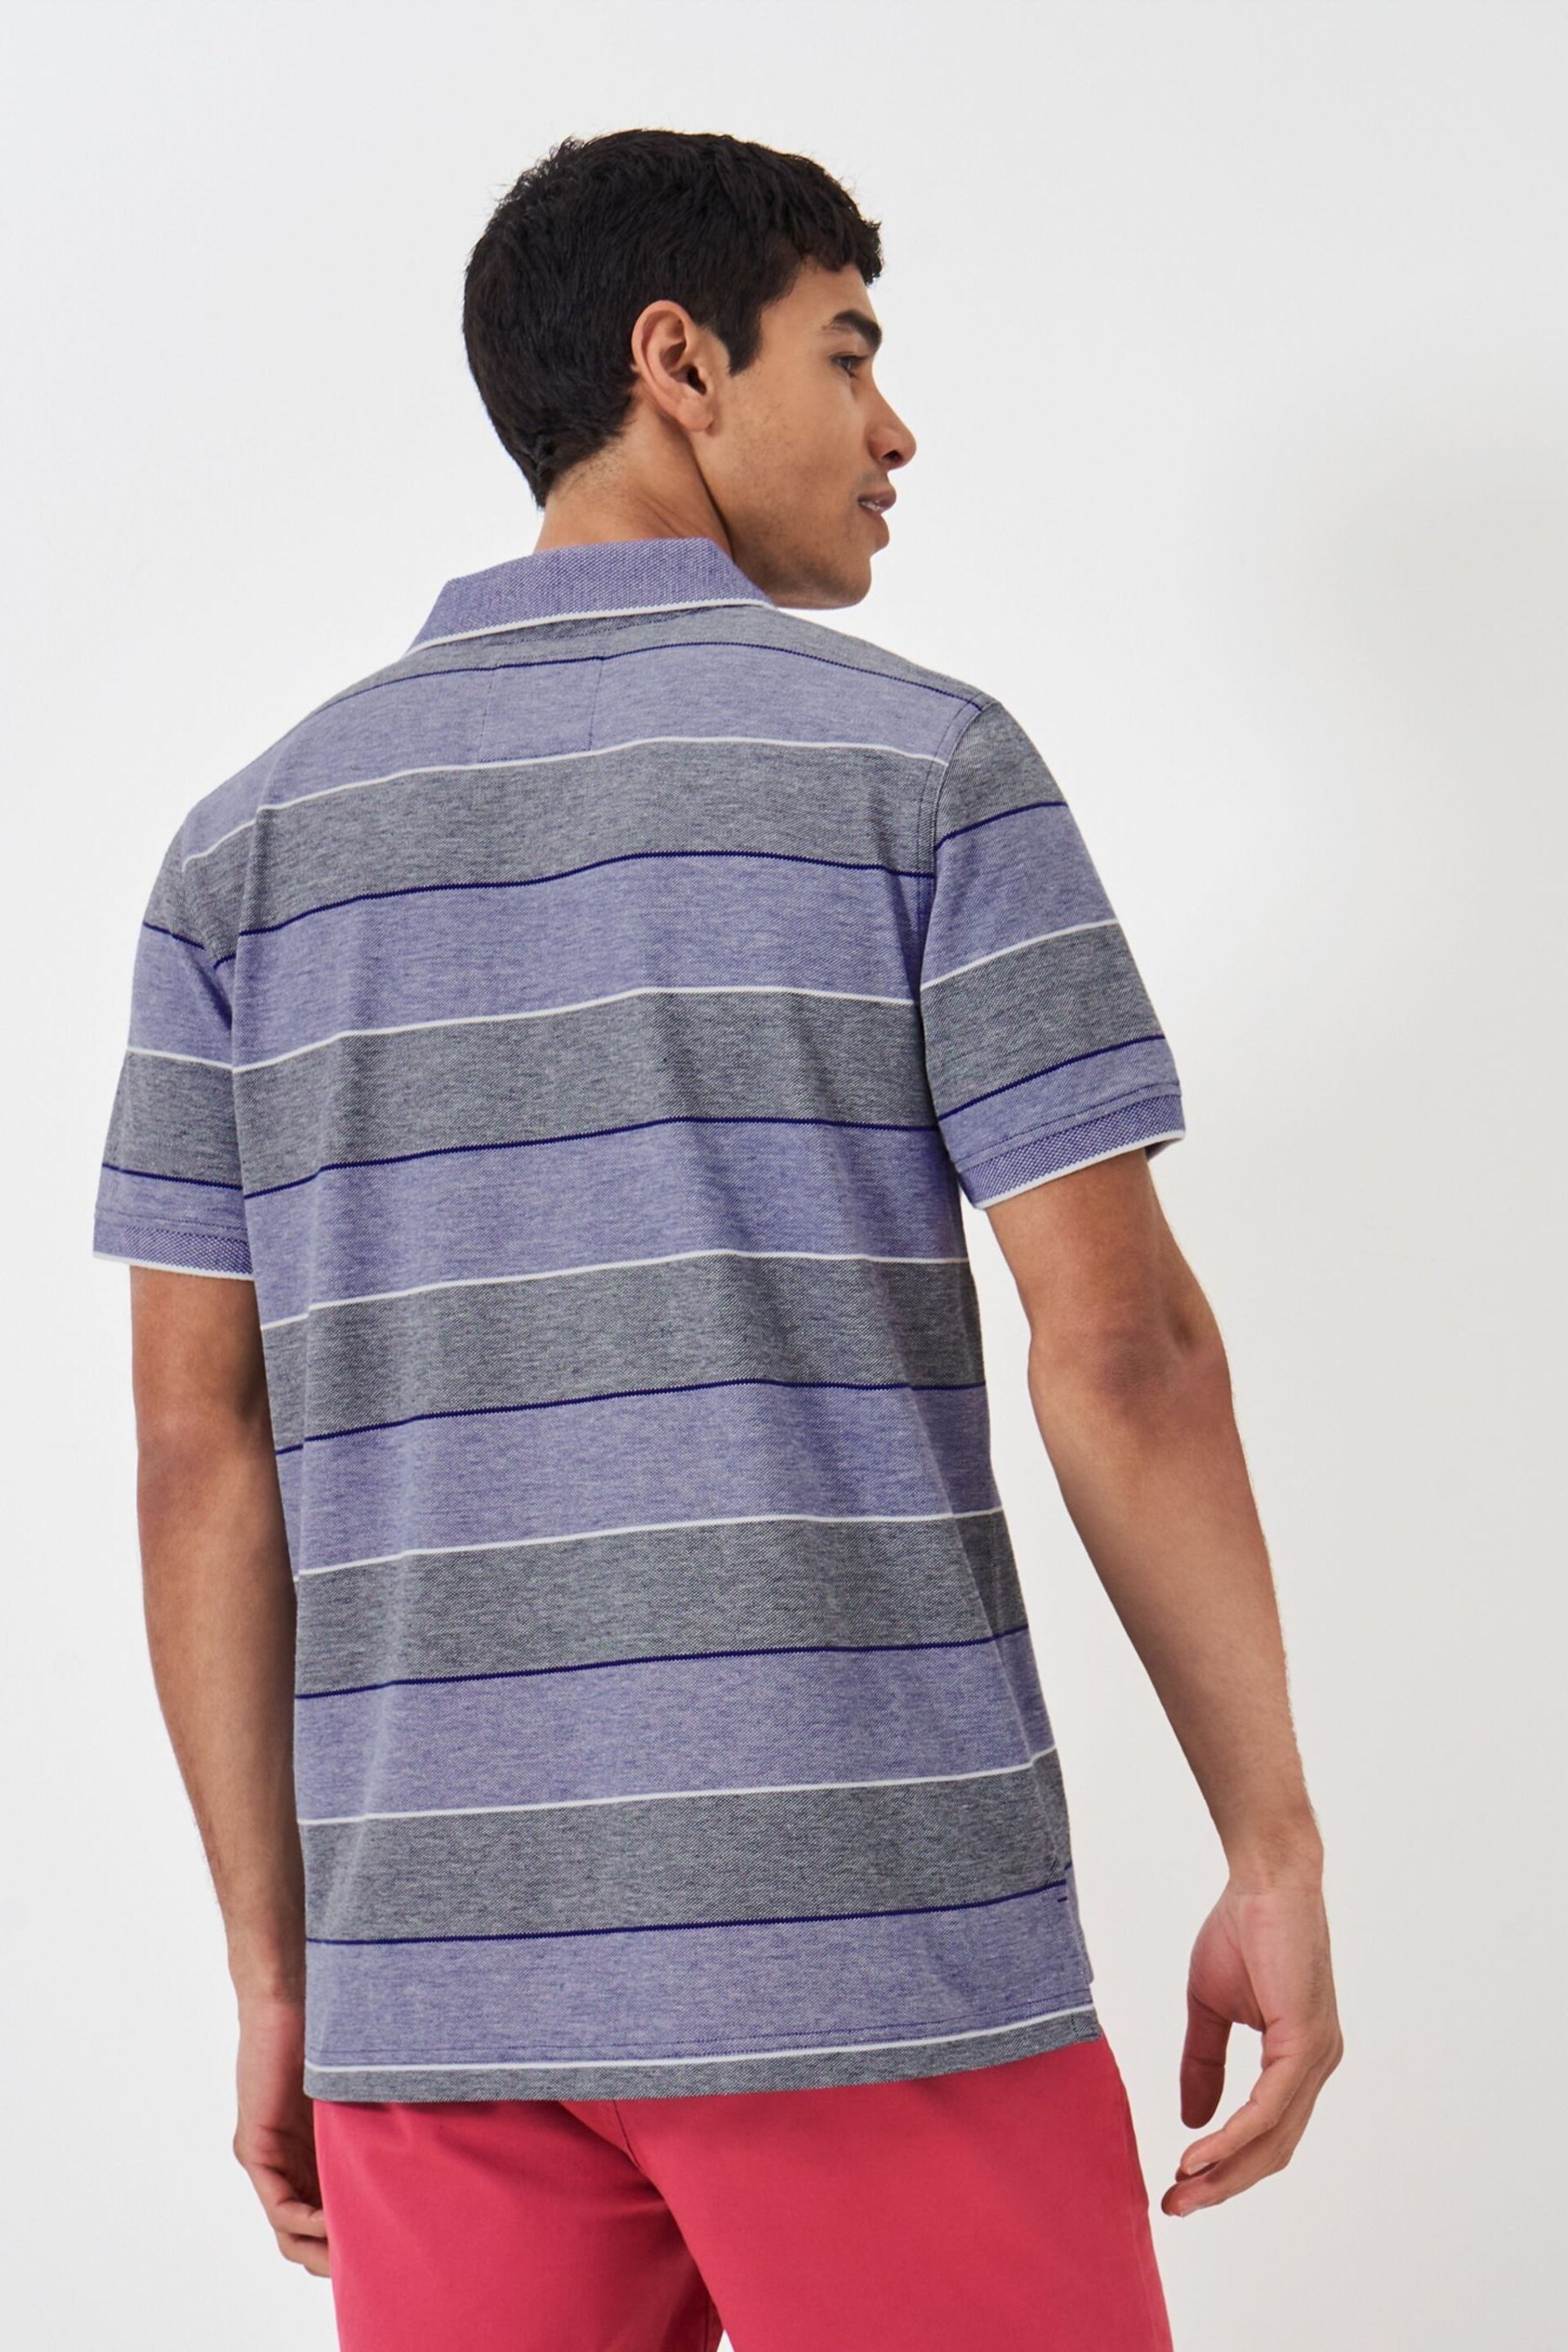 Crew Clothing Company Navy Blue Stripe Cotton Classic Polo Shirt - Image 2 of 5